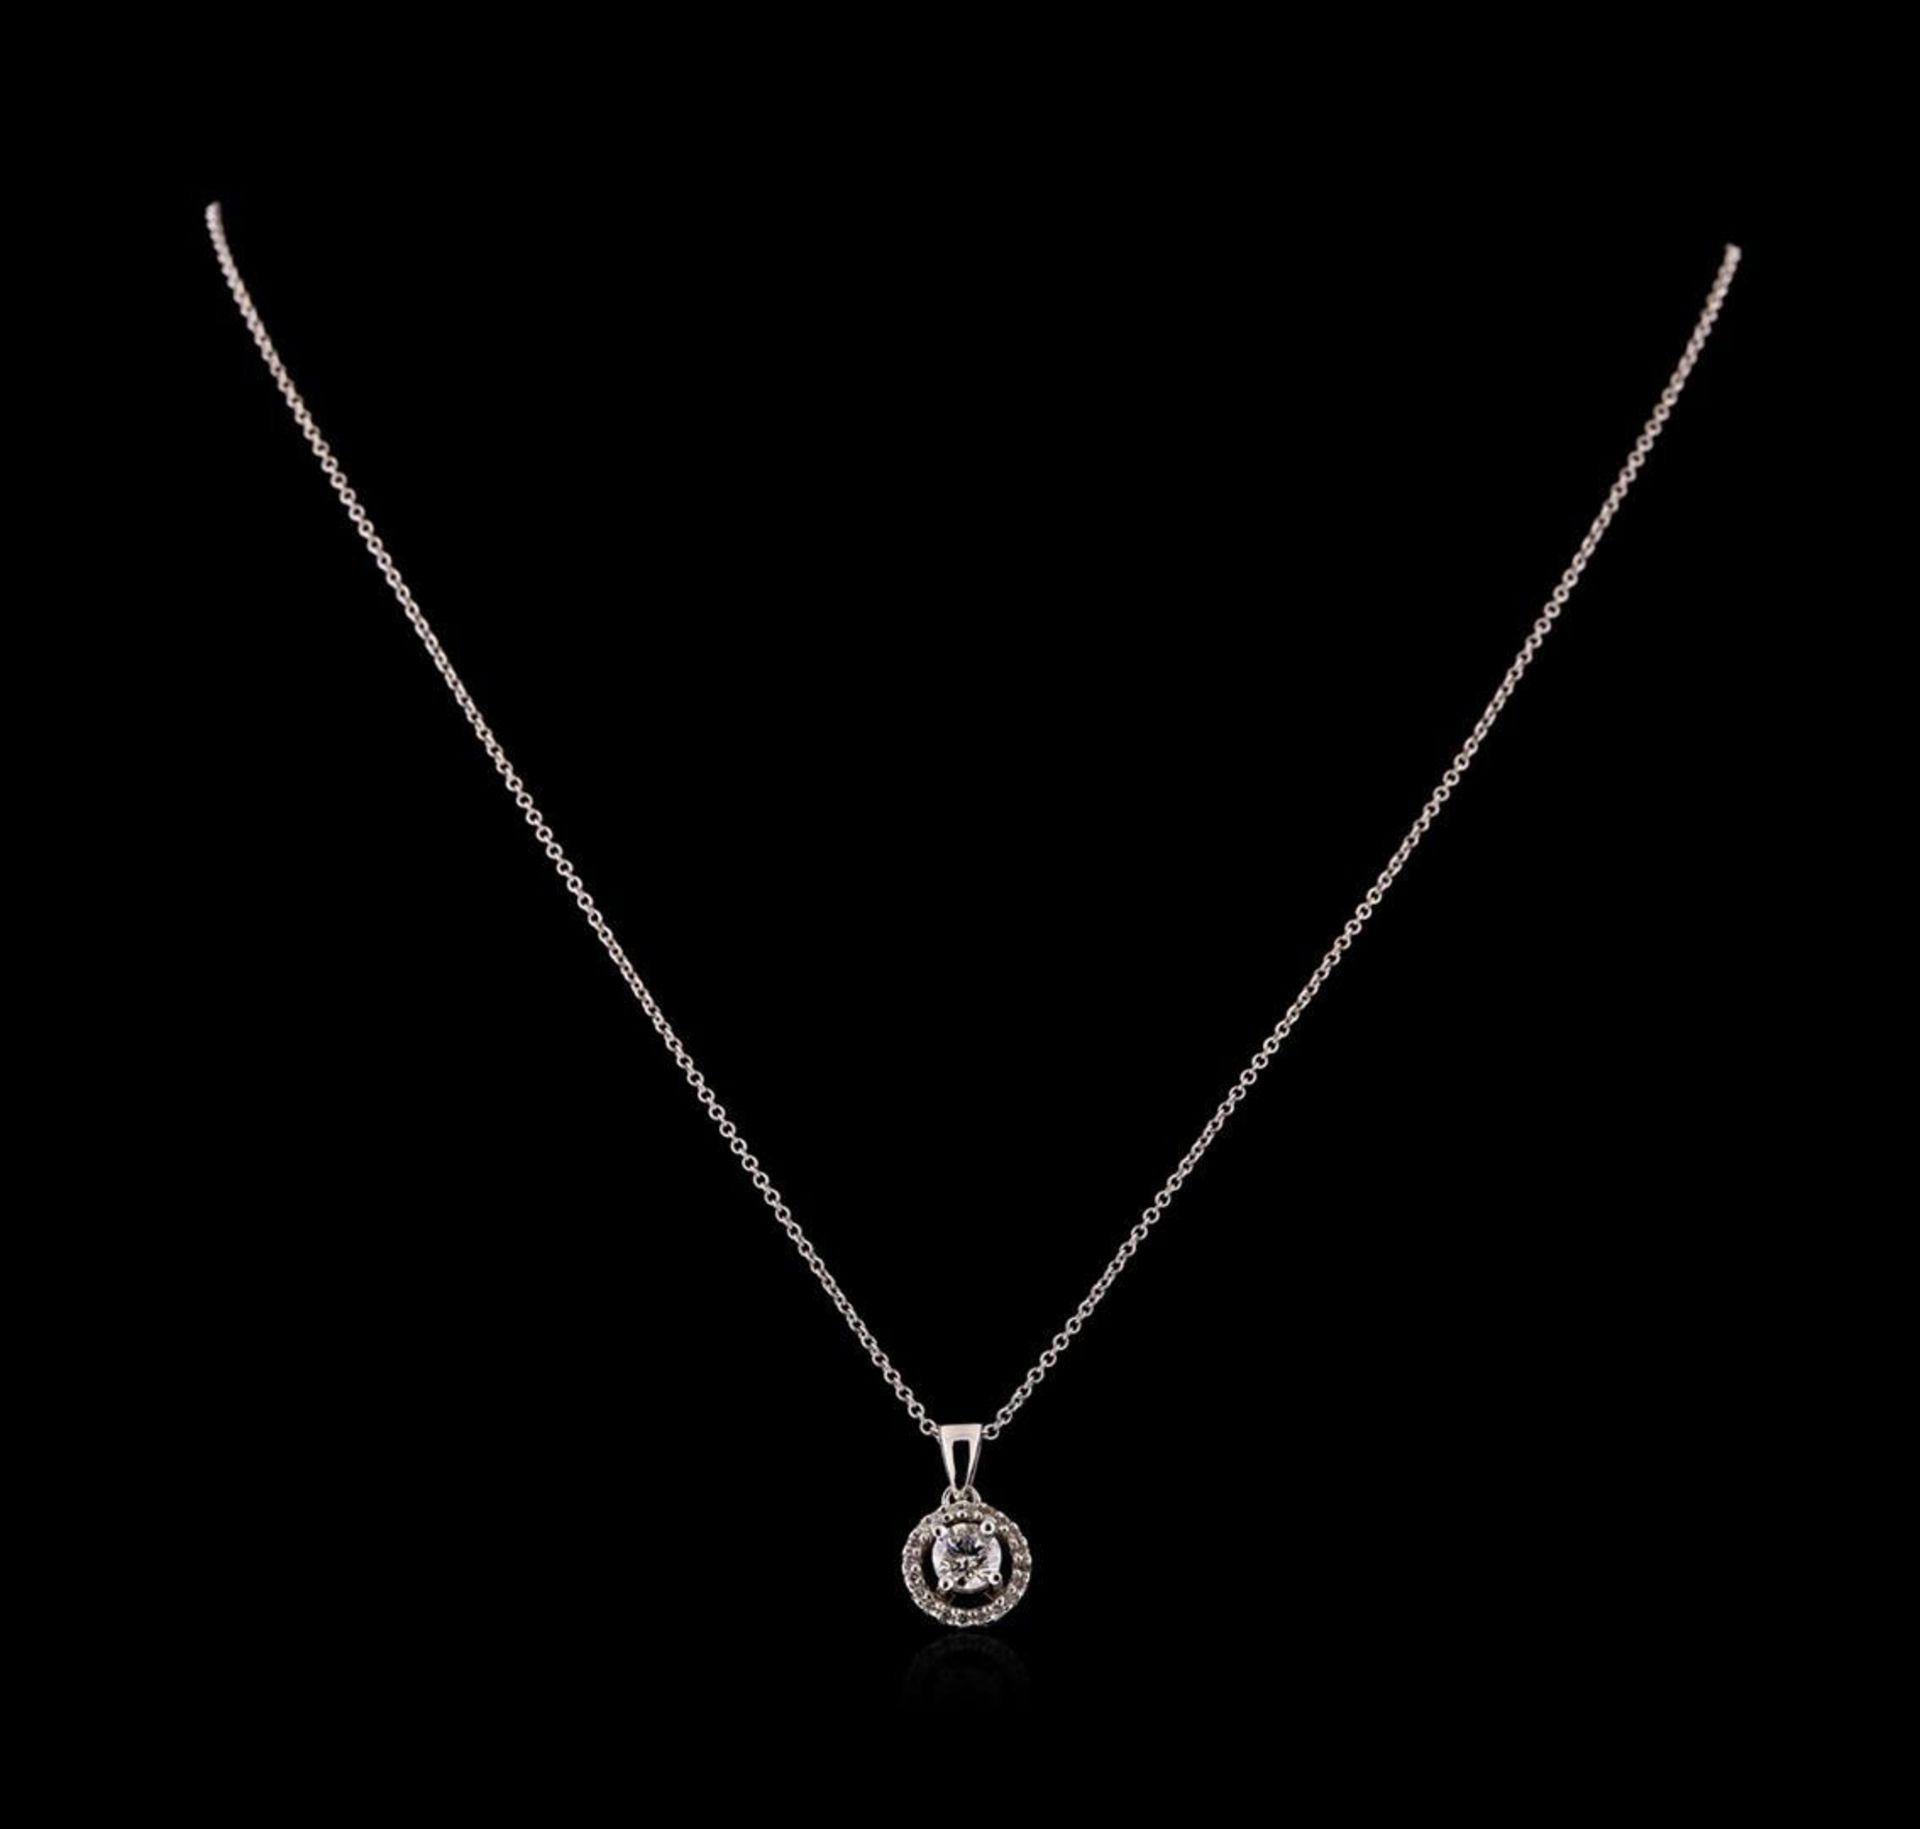 0.66 ctw Diamond Pendant With Chain - 14KT White Gold - Image 2 of 3